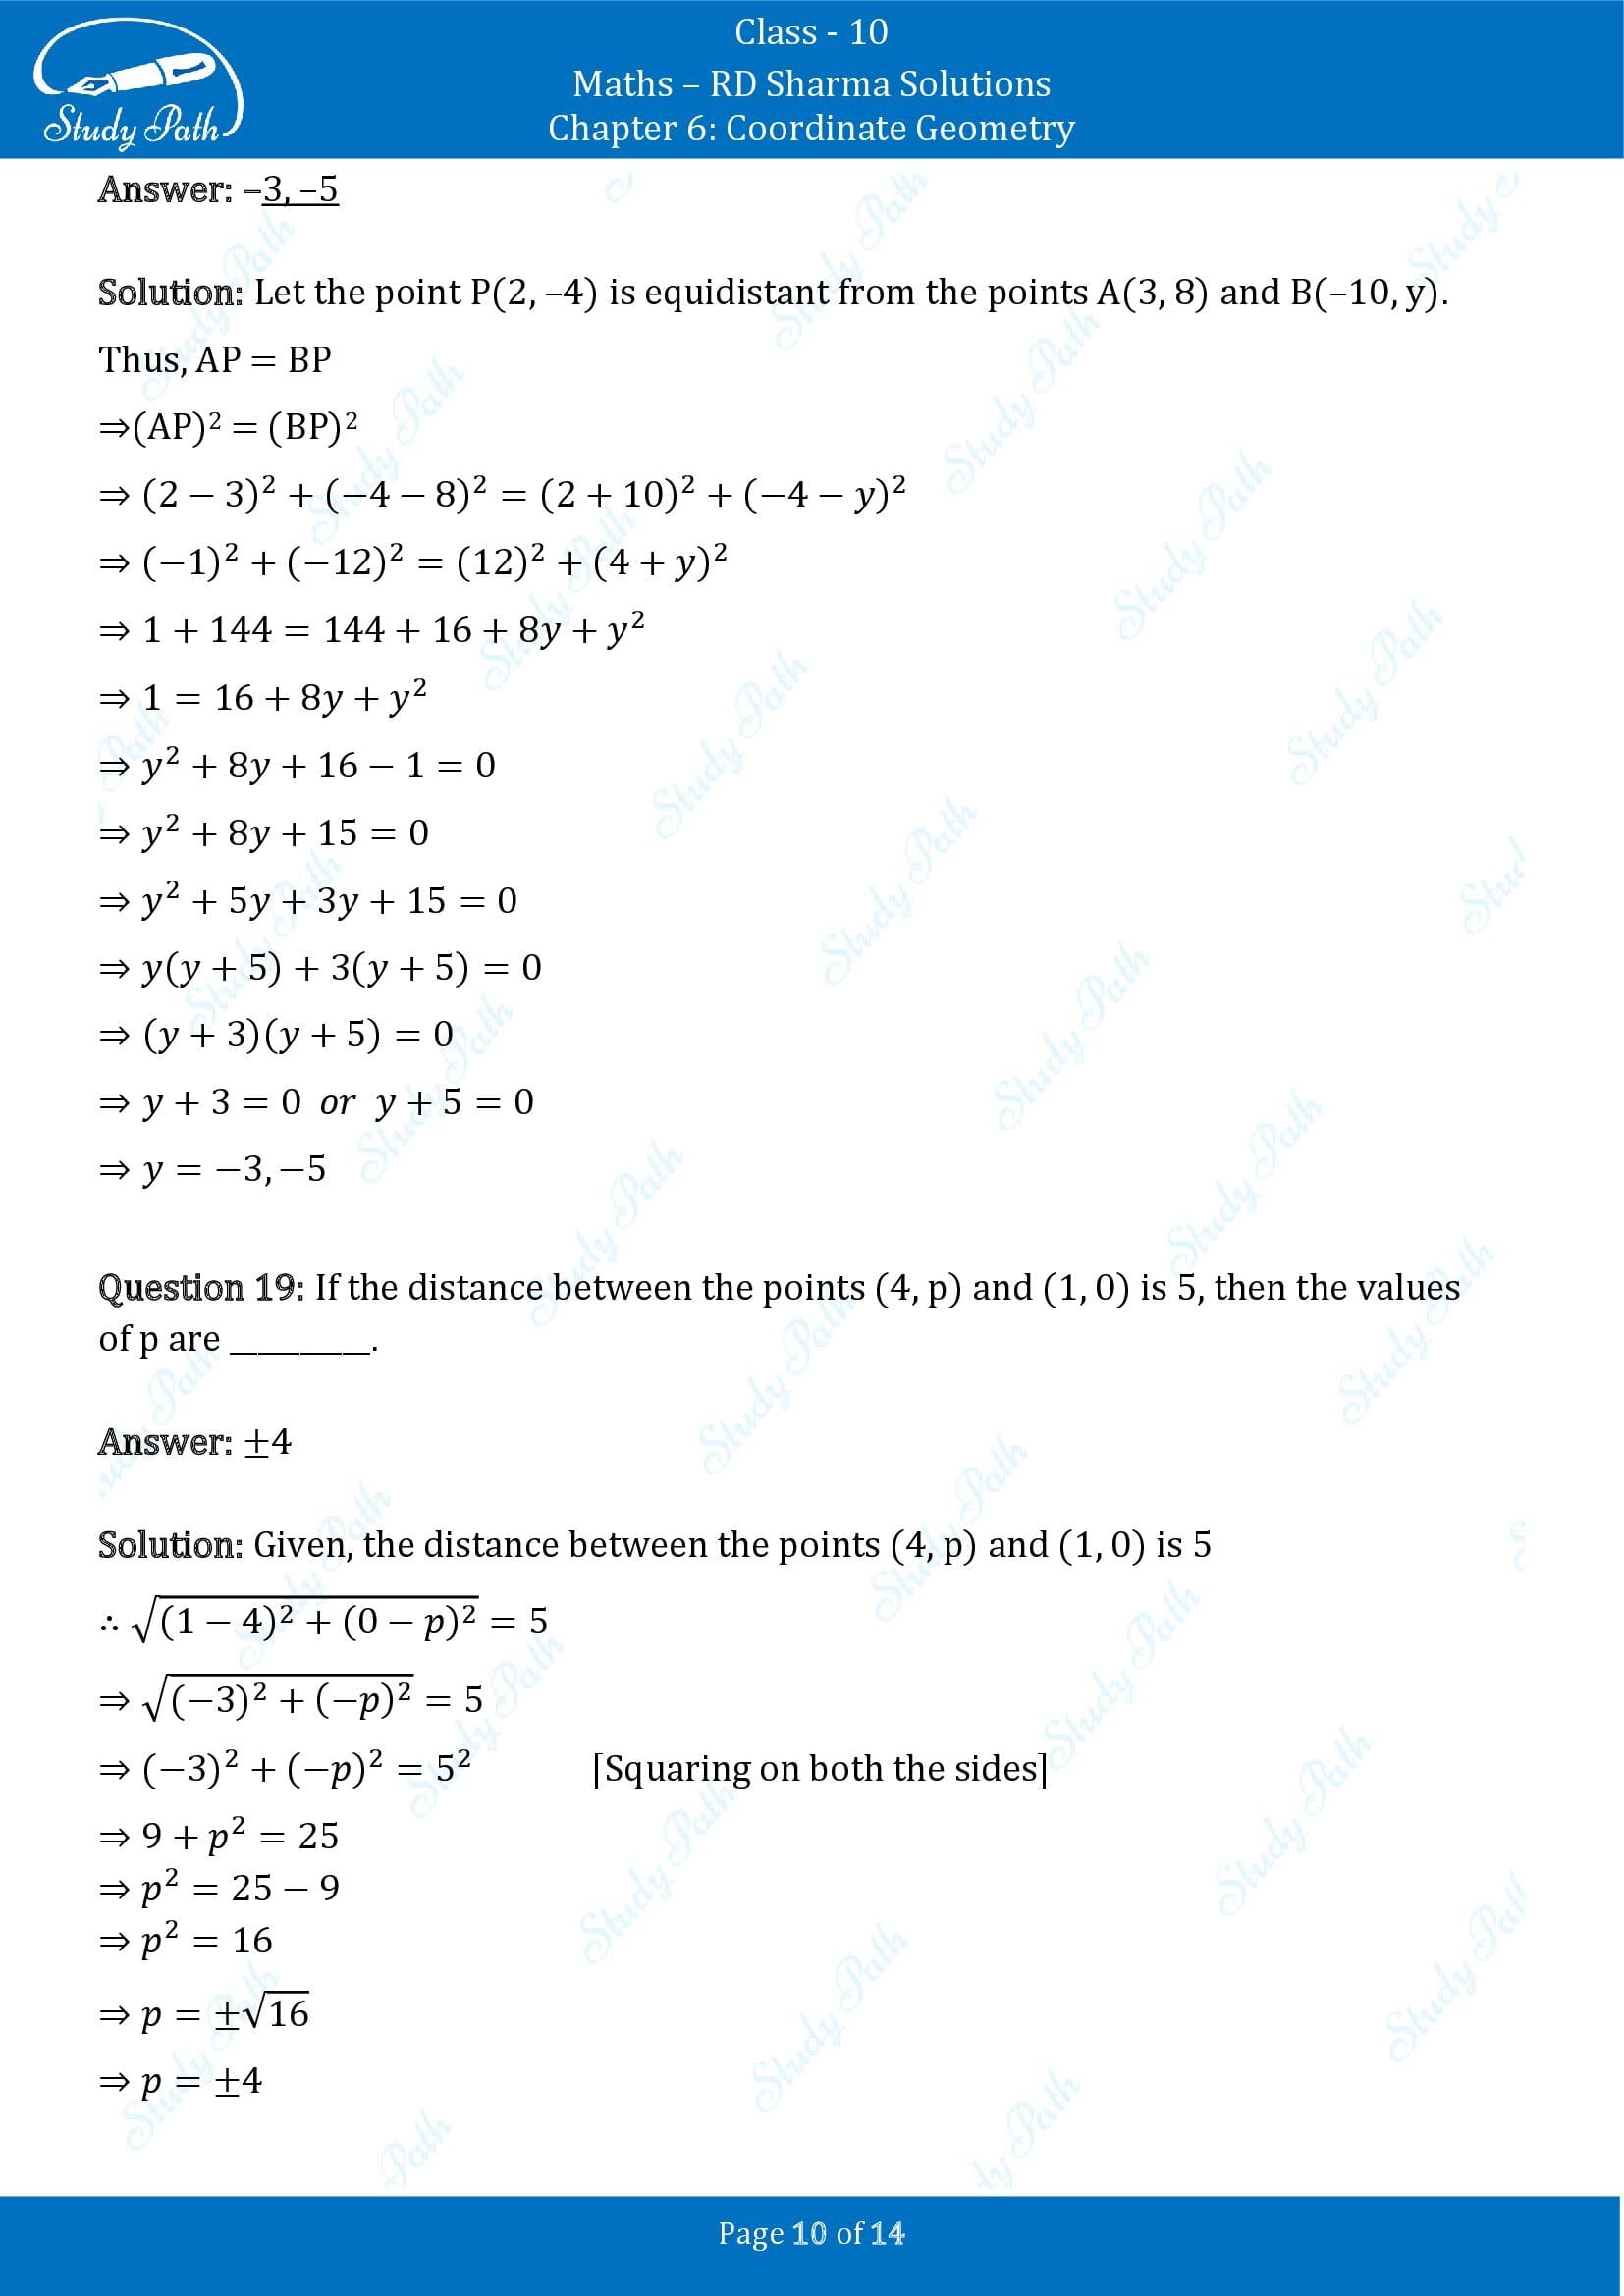 RD Sharma Solutions Class 10 Chapter 6 Coordinate Geometry Fill in the Blank Type Questions FBQs 00010